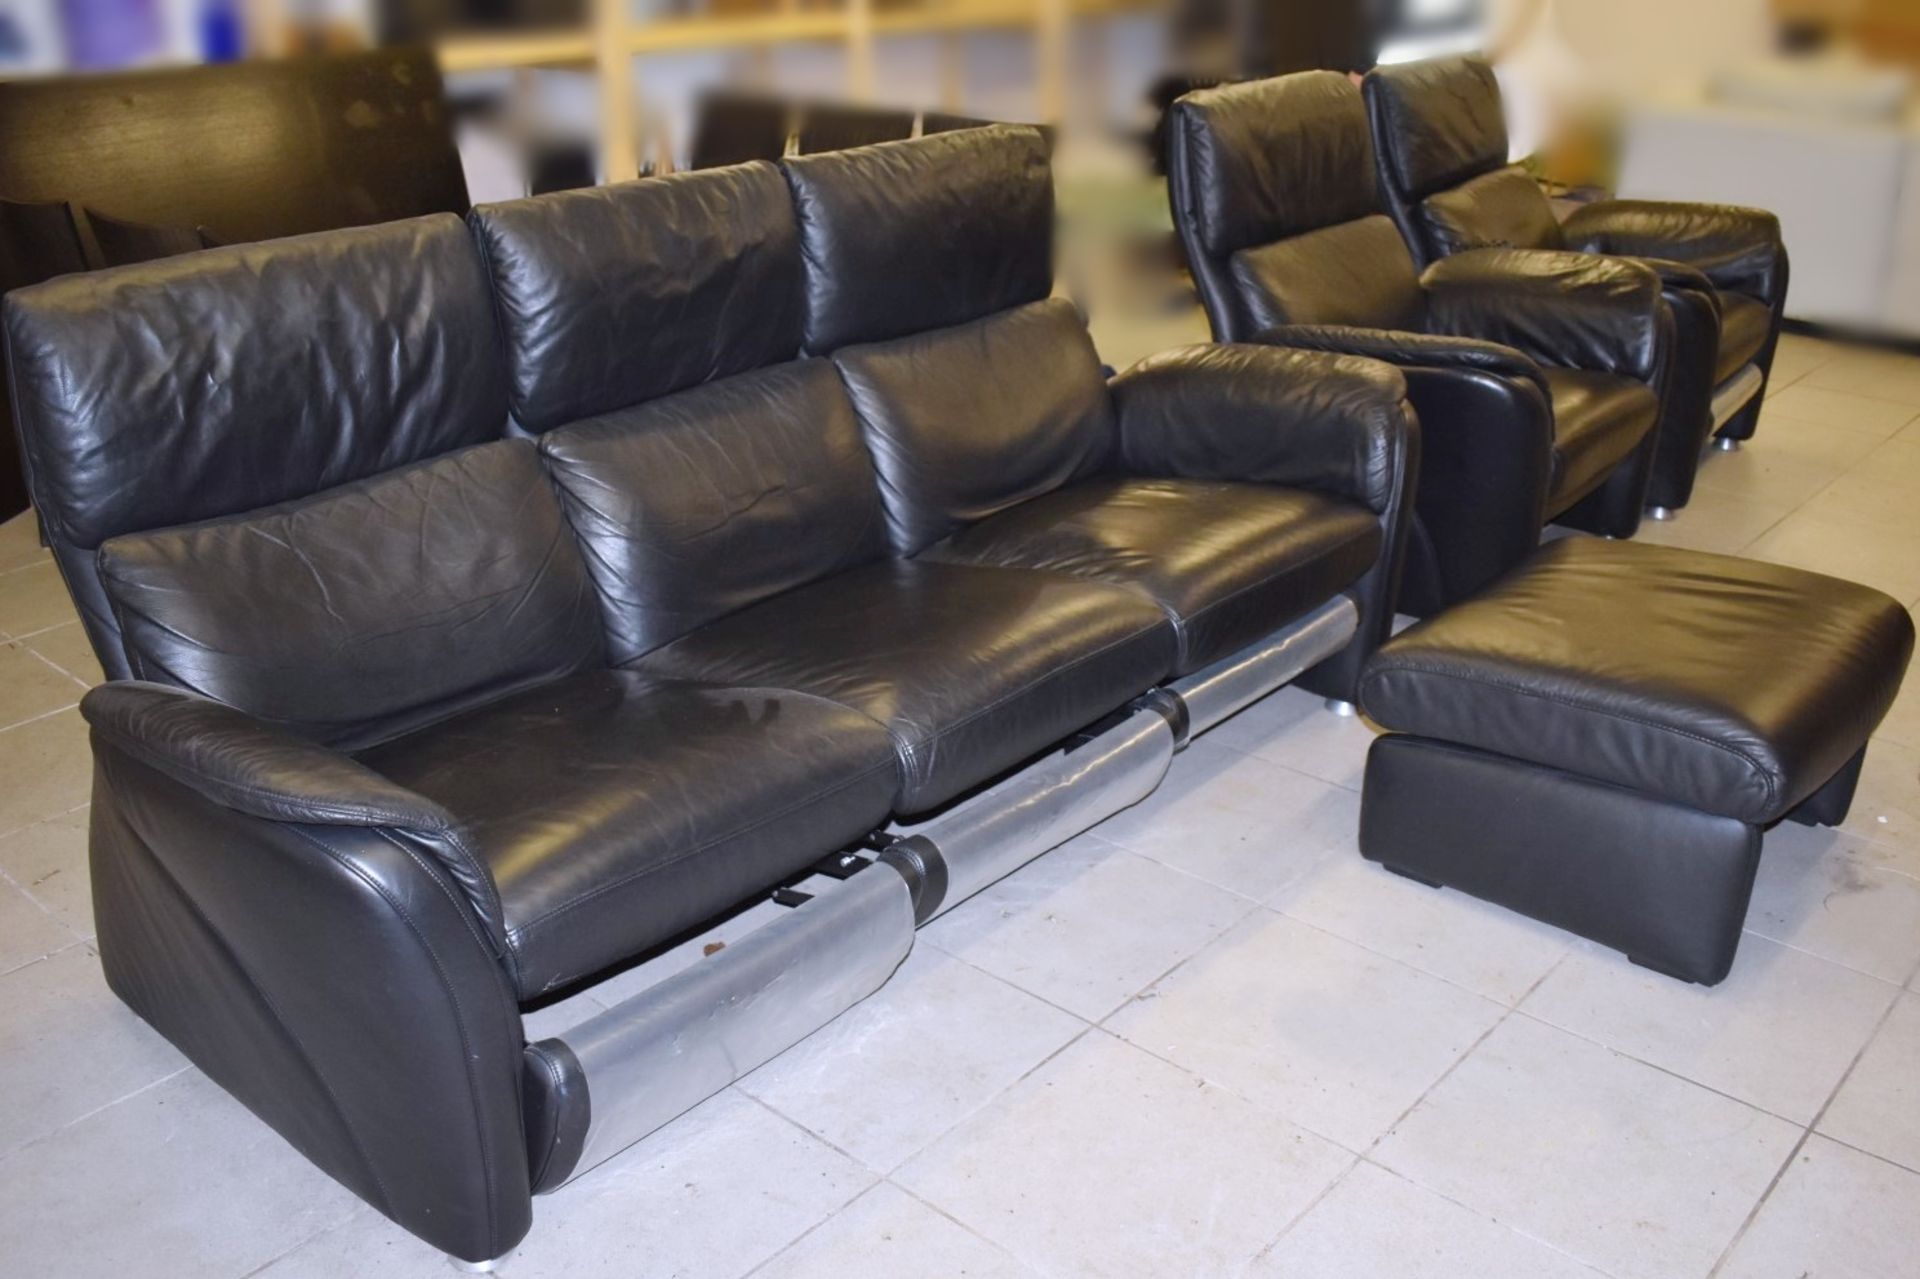 1 x Black Leather Reclining Sofa Set With Two Reclining Armchairs and Footstool - To Be Removed From - Image 10 of 14